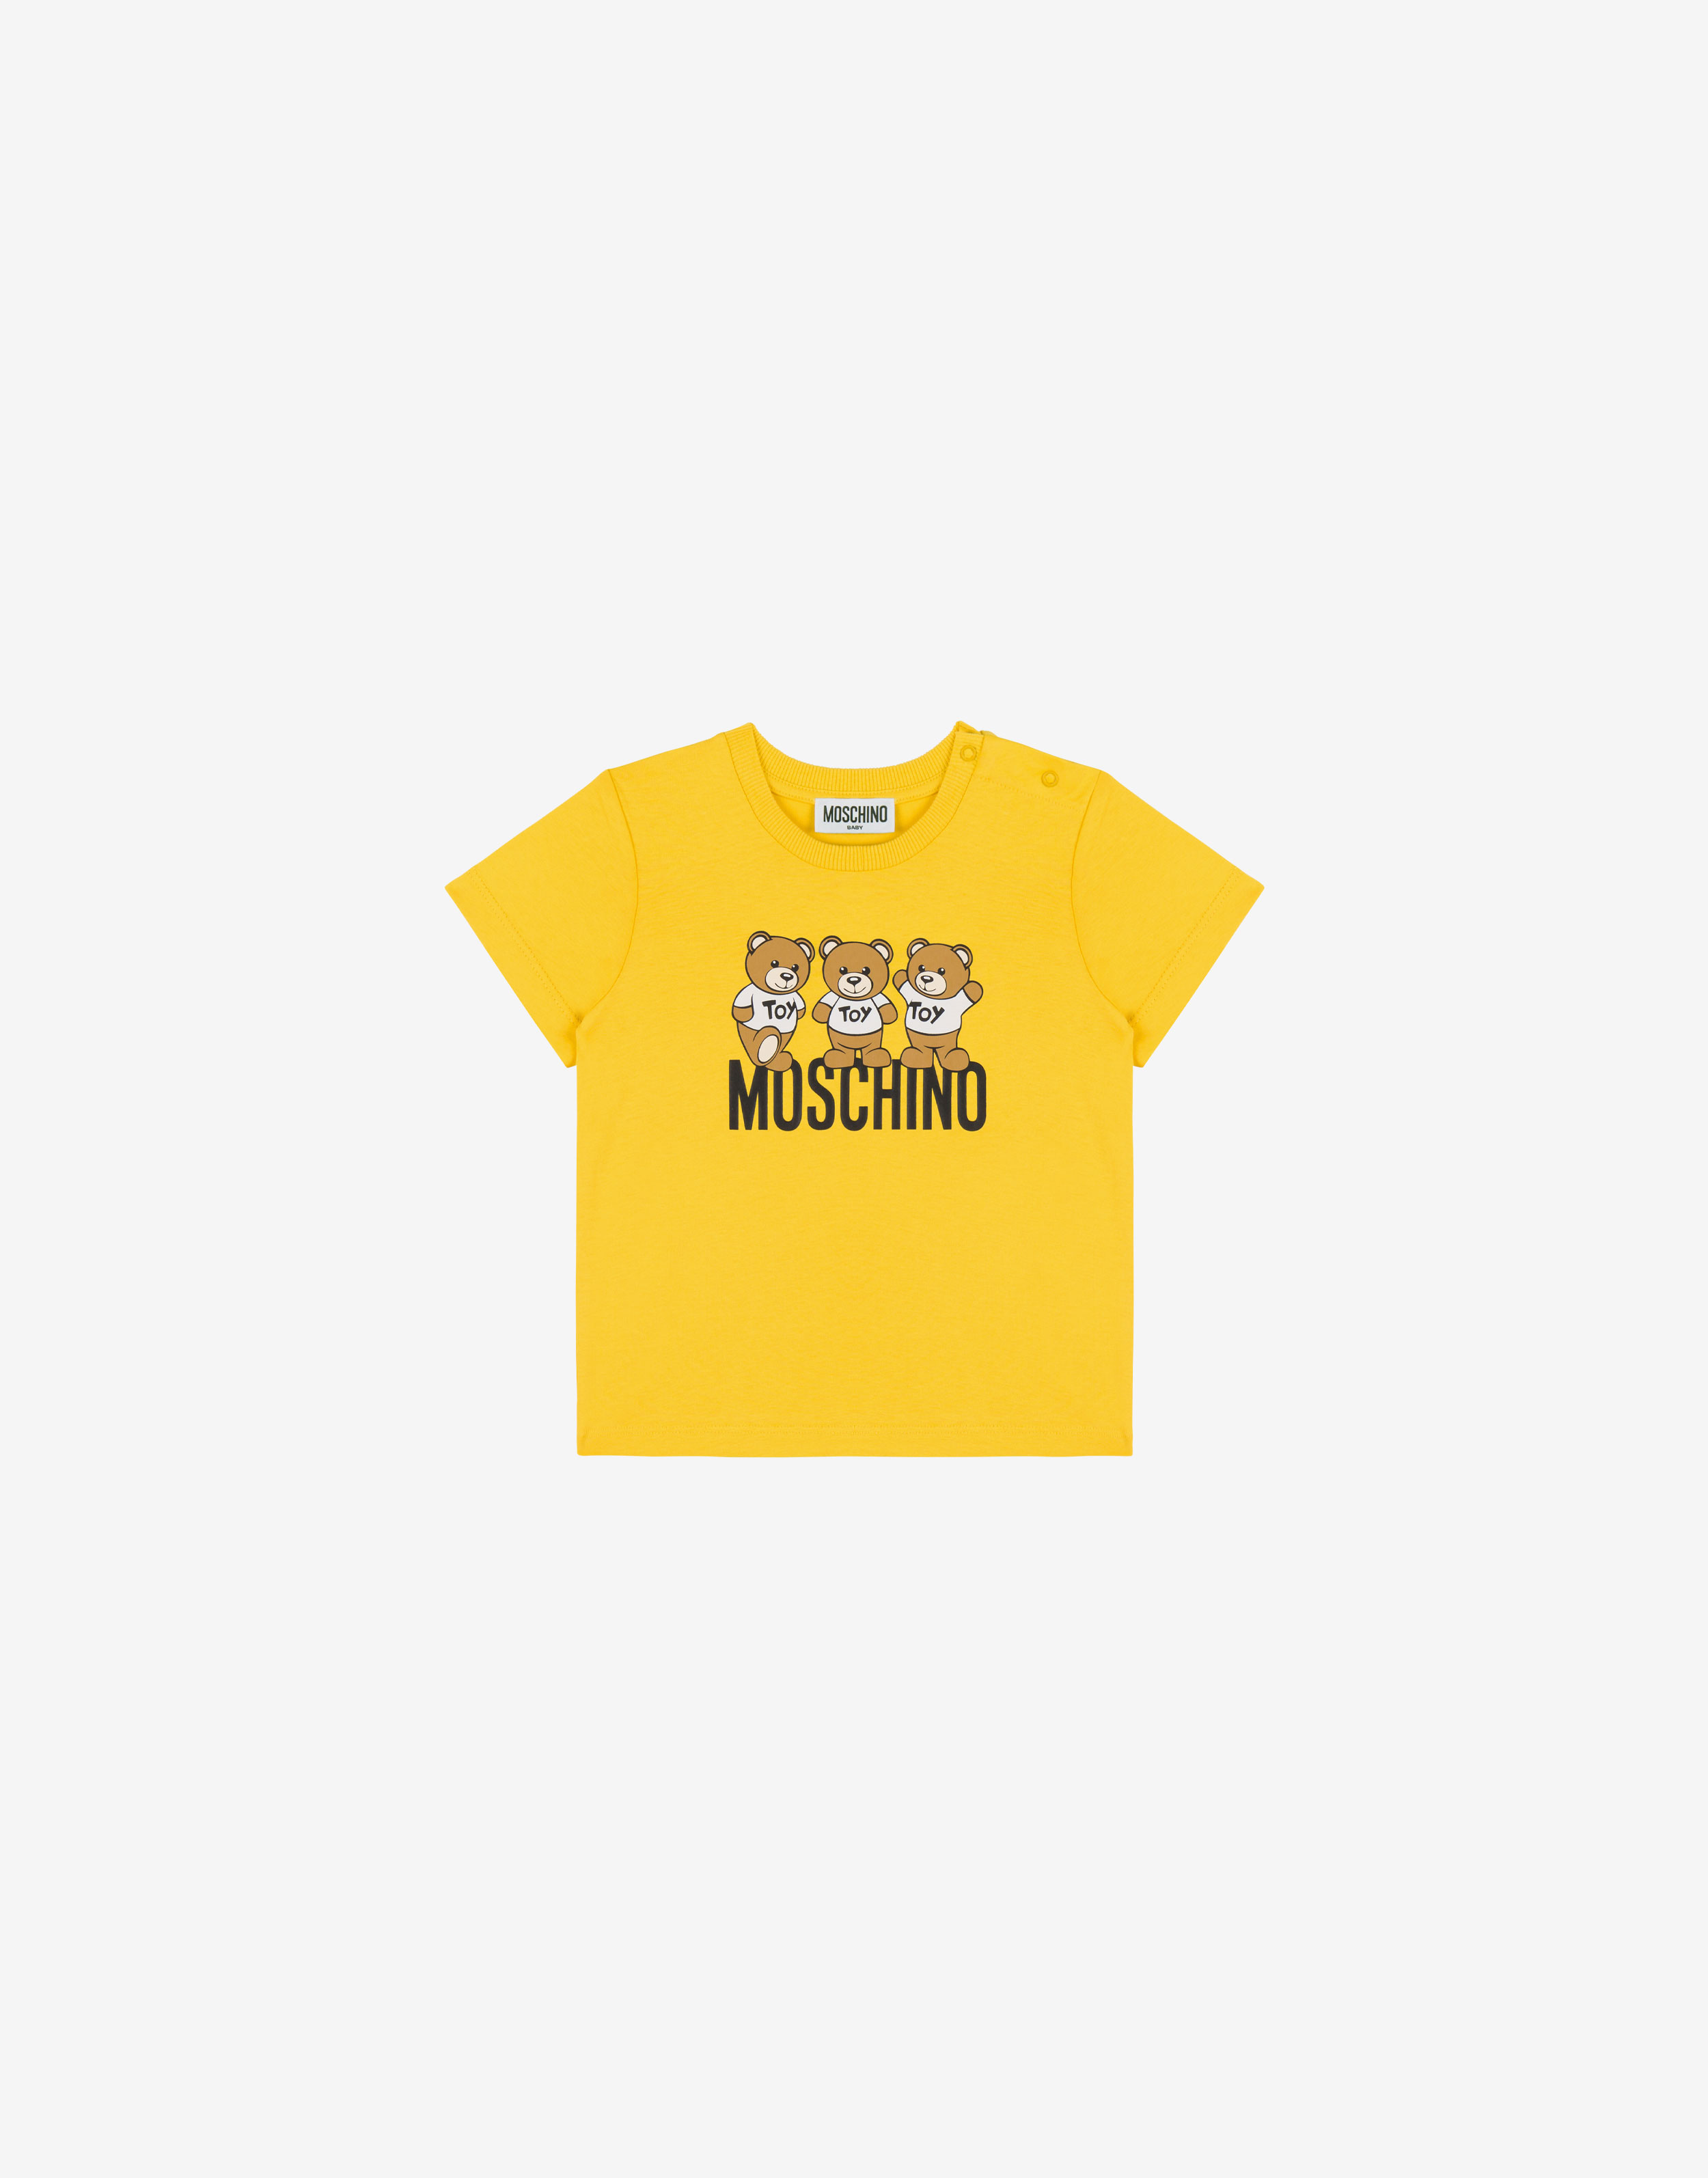 Moschino Clothing Men  Moschino Official Store